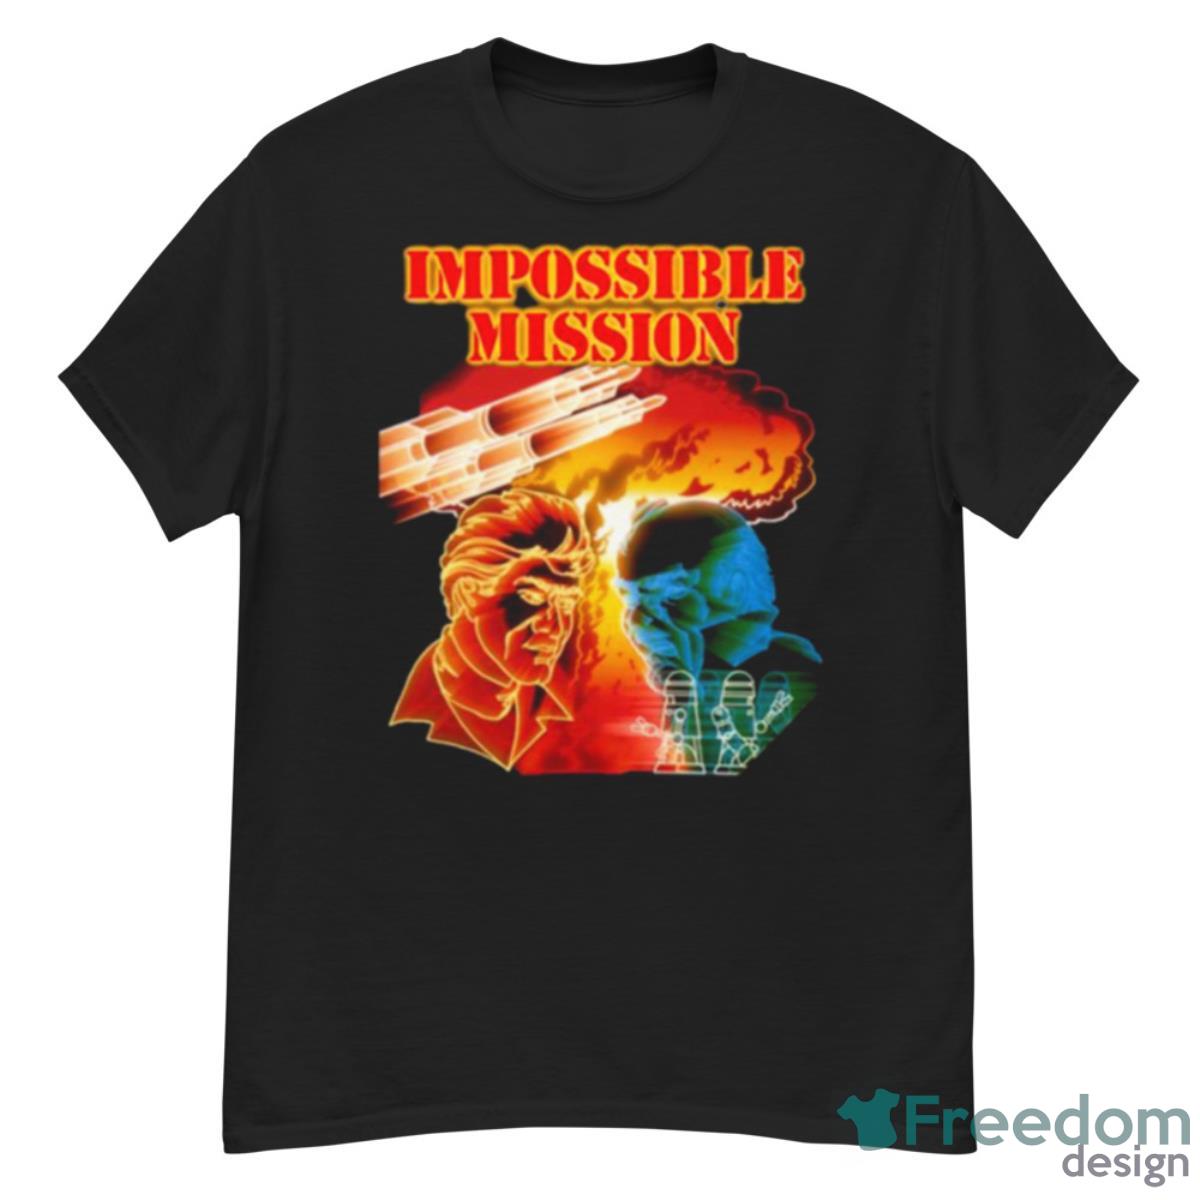 Impossible Mission Poster Shirt - G500 Men’s Classic T-Shirt